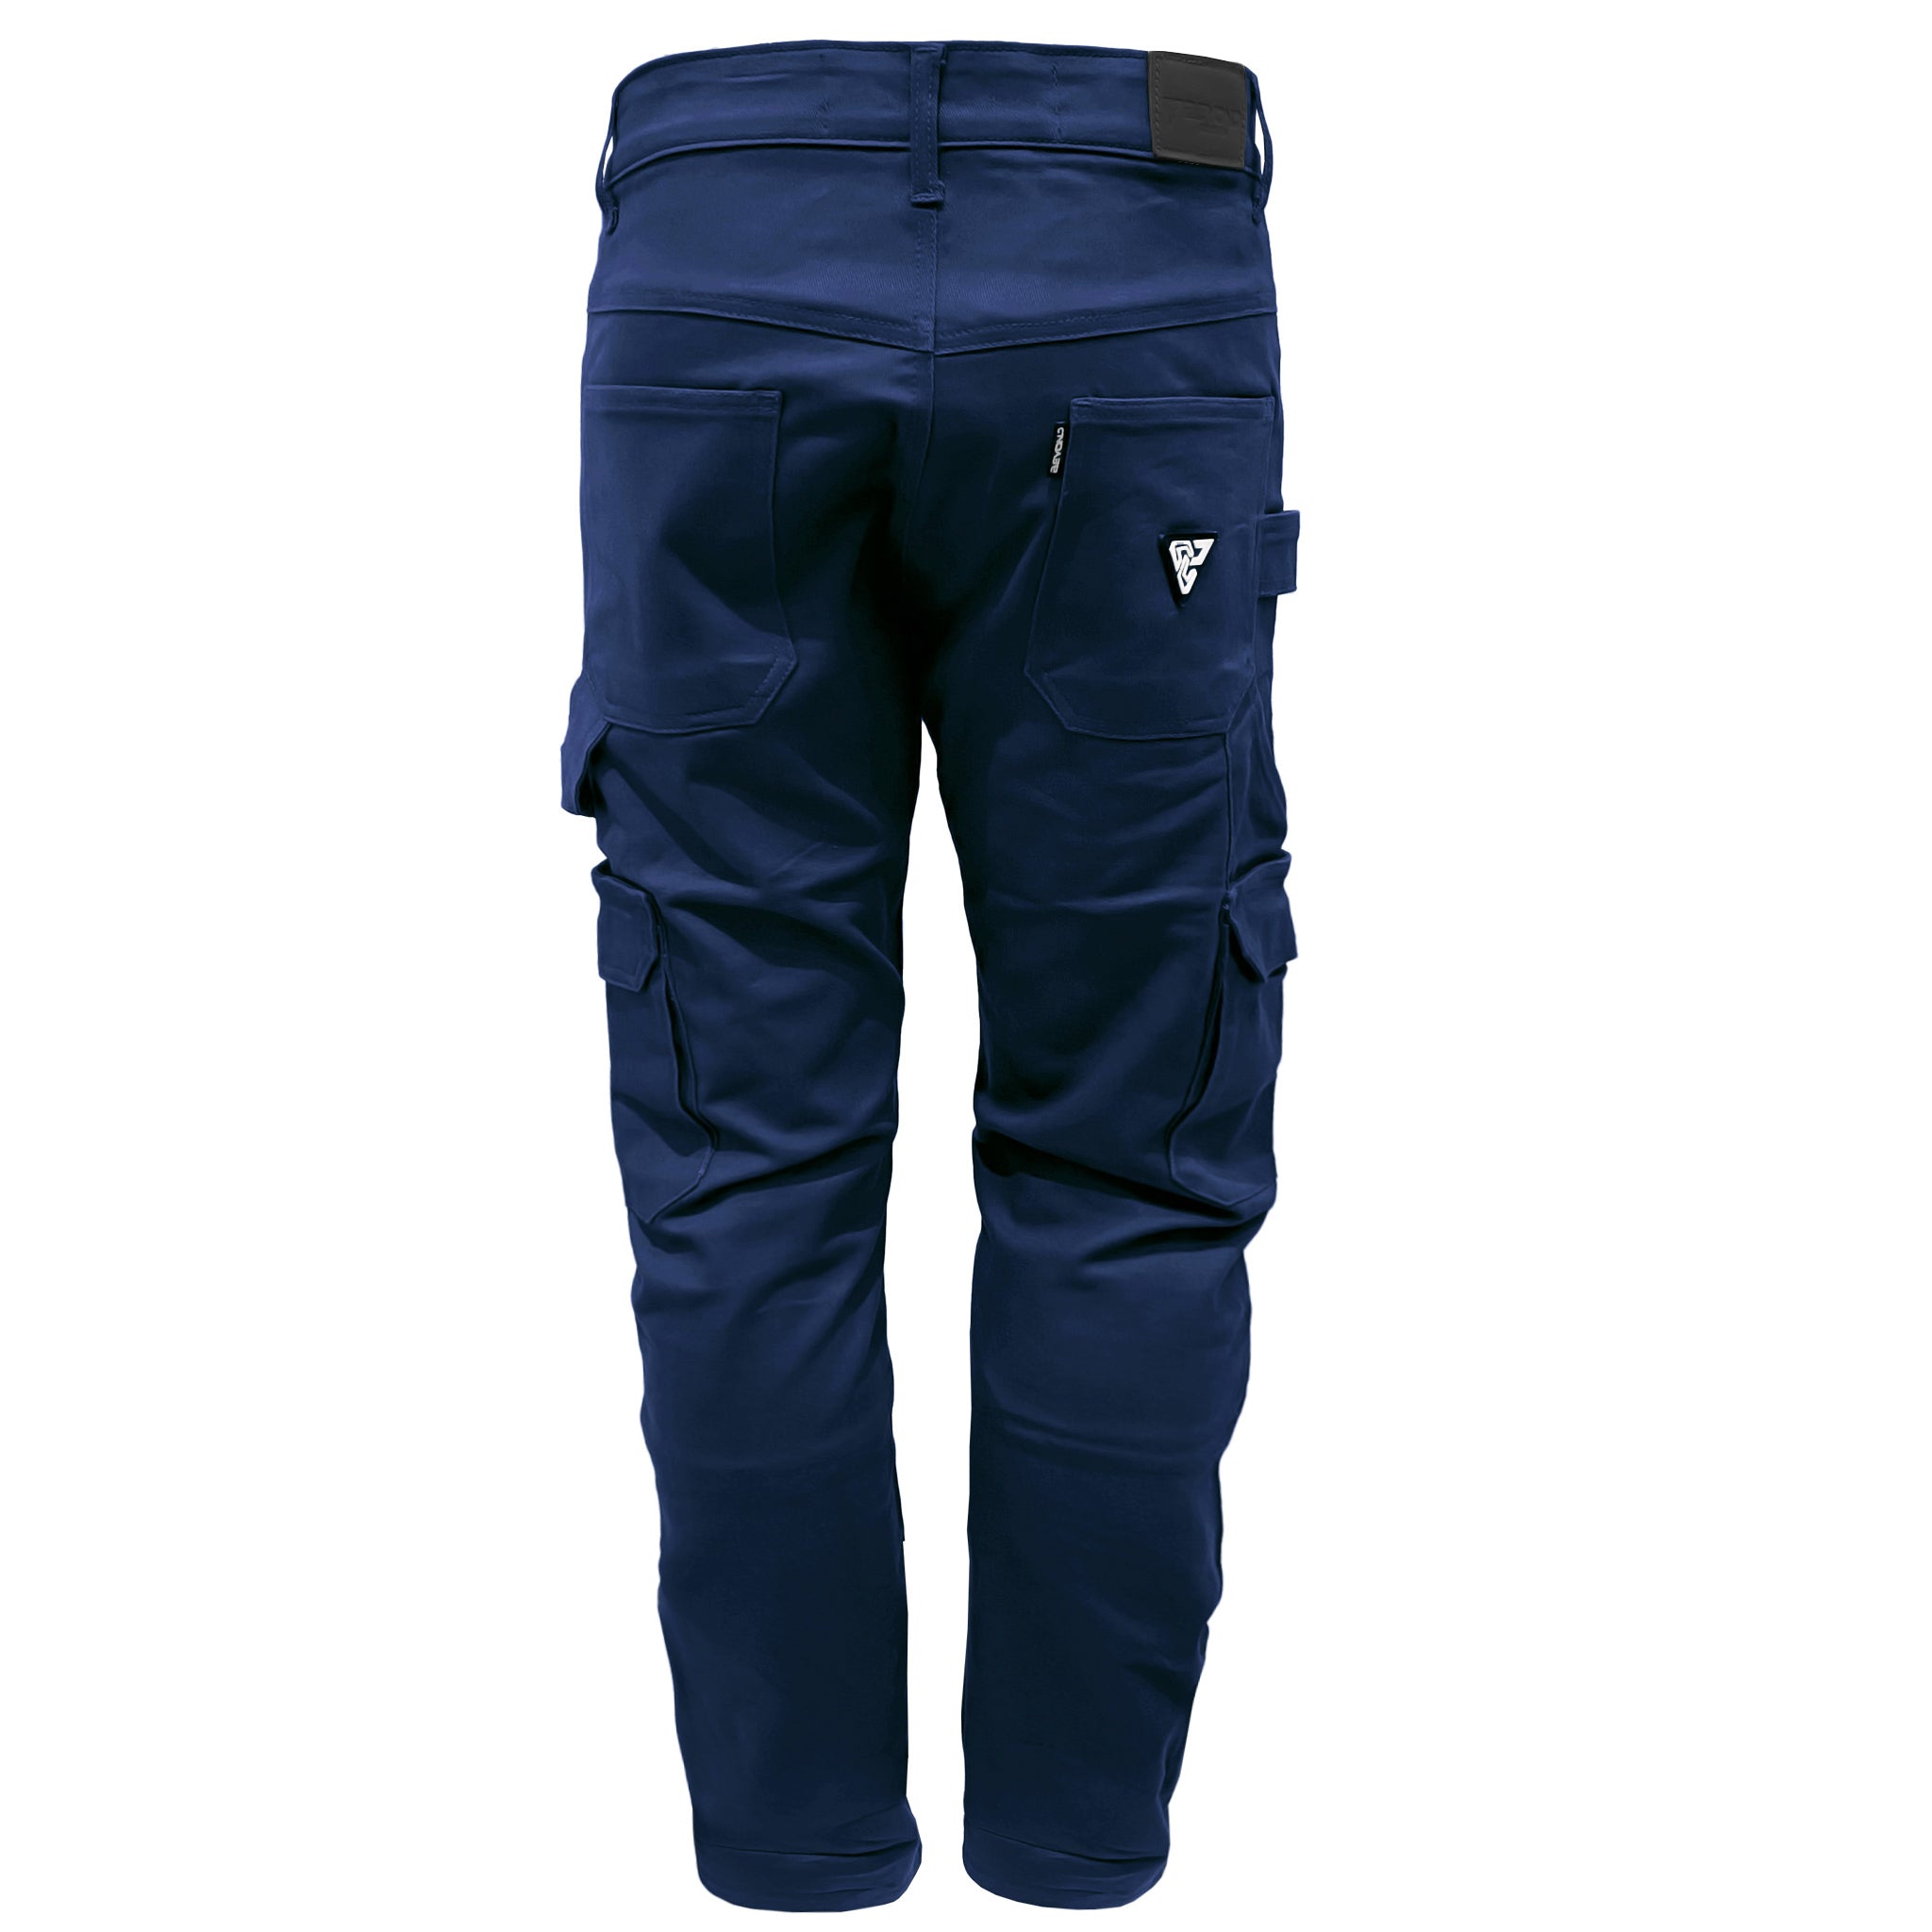 Loose Fit Cargo Pants - Navy Blue with Pads